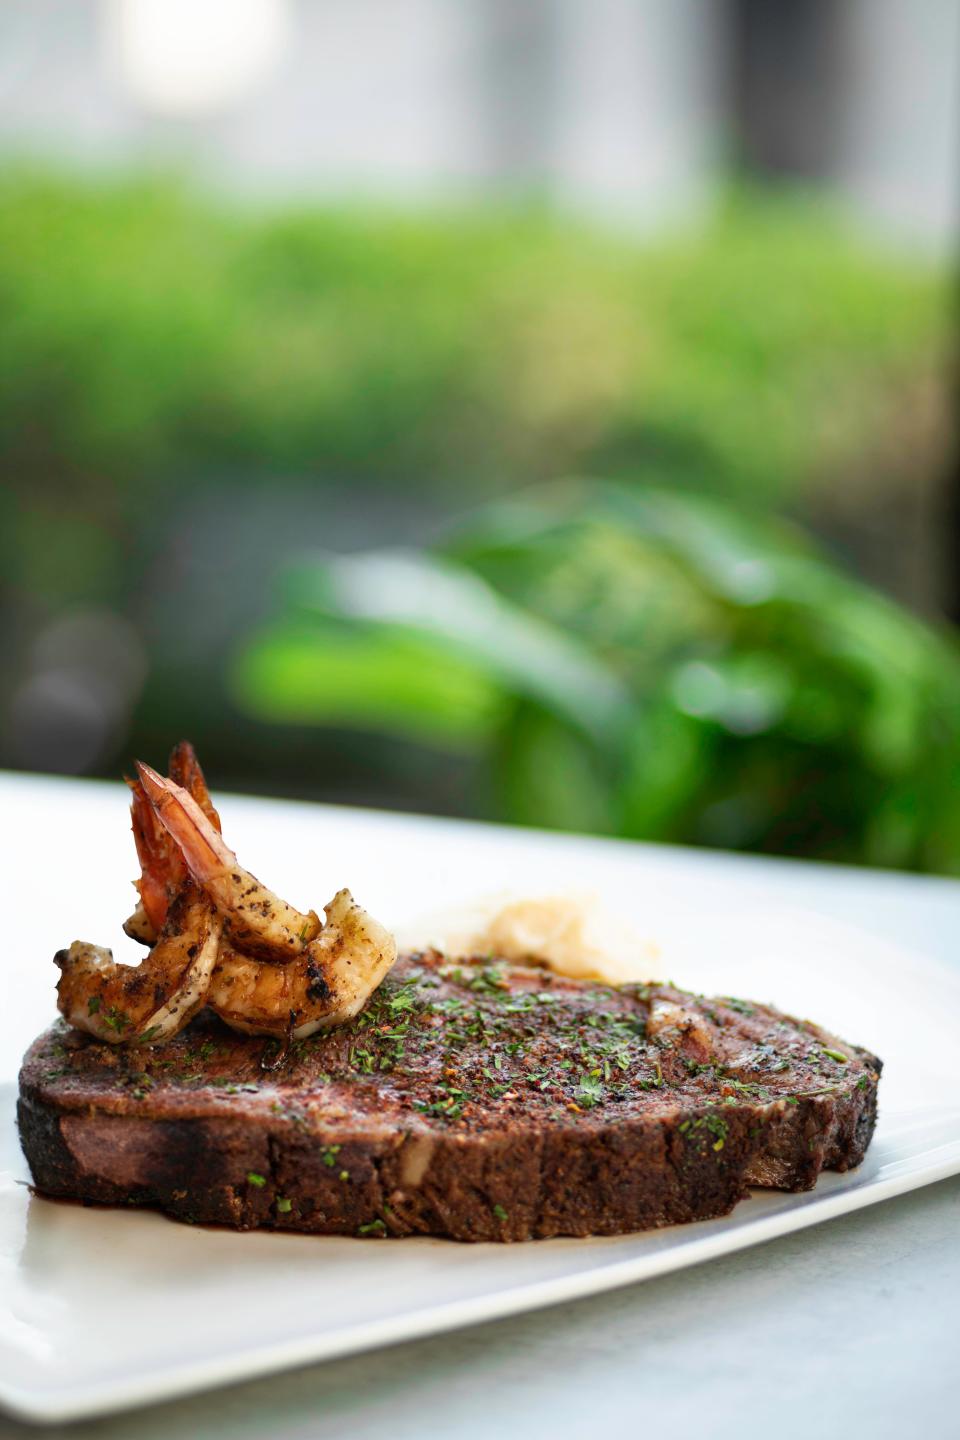 Treat Dad to Kona Grill with Kona Grill’s Signature Kona-Mosa Brunch, available Saturday and Sunday. Dishes will include a Big Daddy Surf & Turf 20-ounce prime rib paired with grilled prawns.